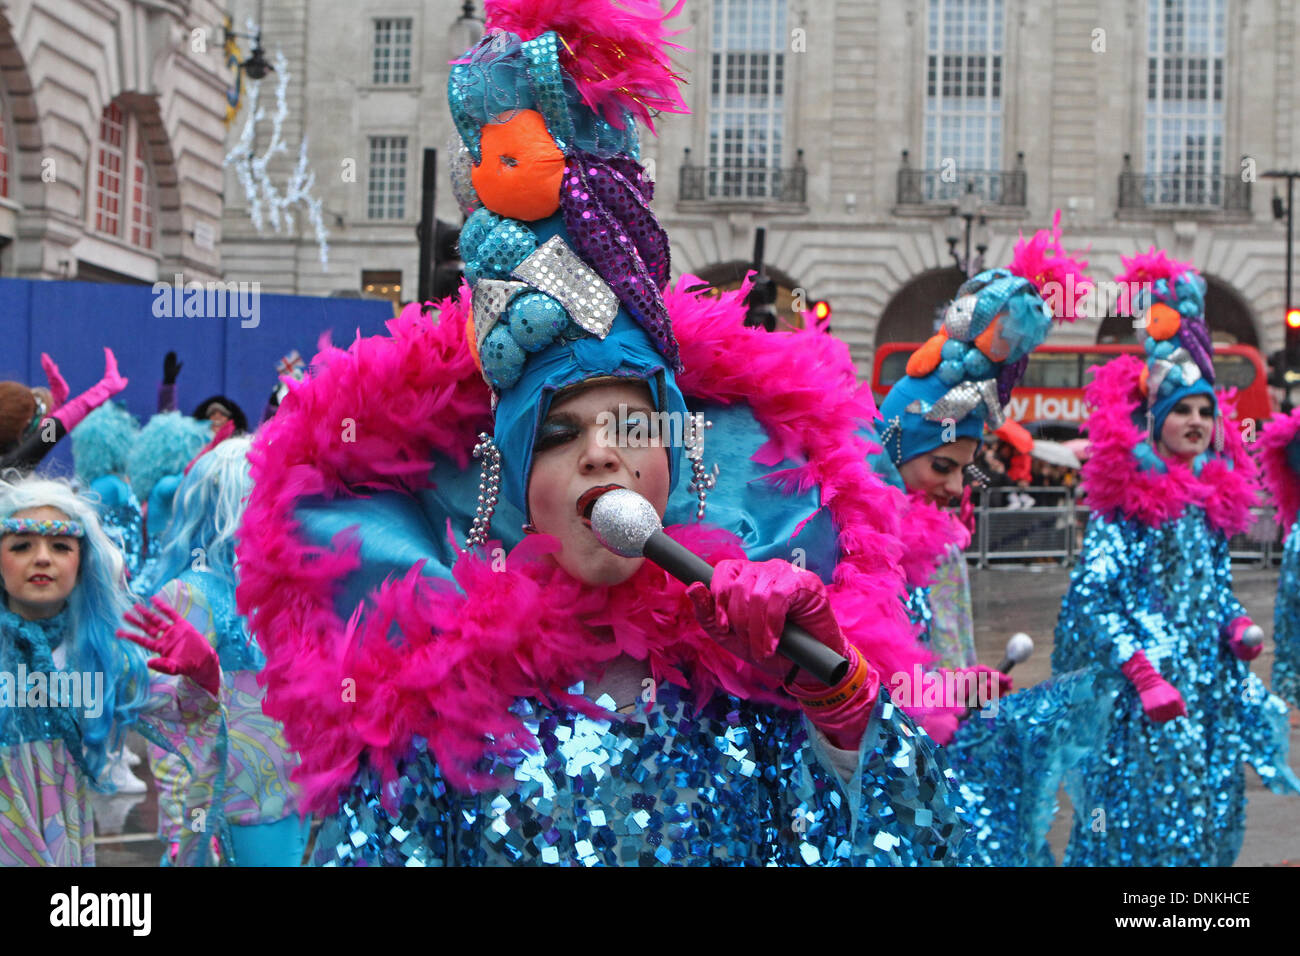 London,UK,1st January 2014,Colourful costumes at the London's New Year's Day Parade 2014 Credit: Keith Larby/Alamy Live News Stock Photo